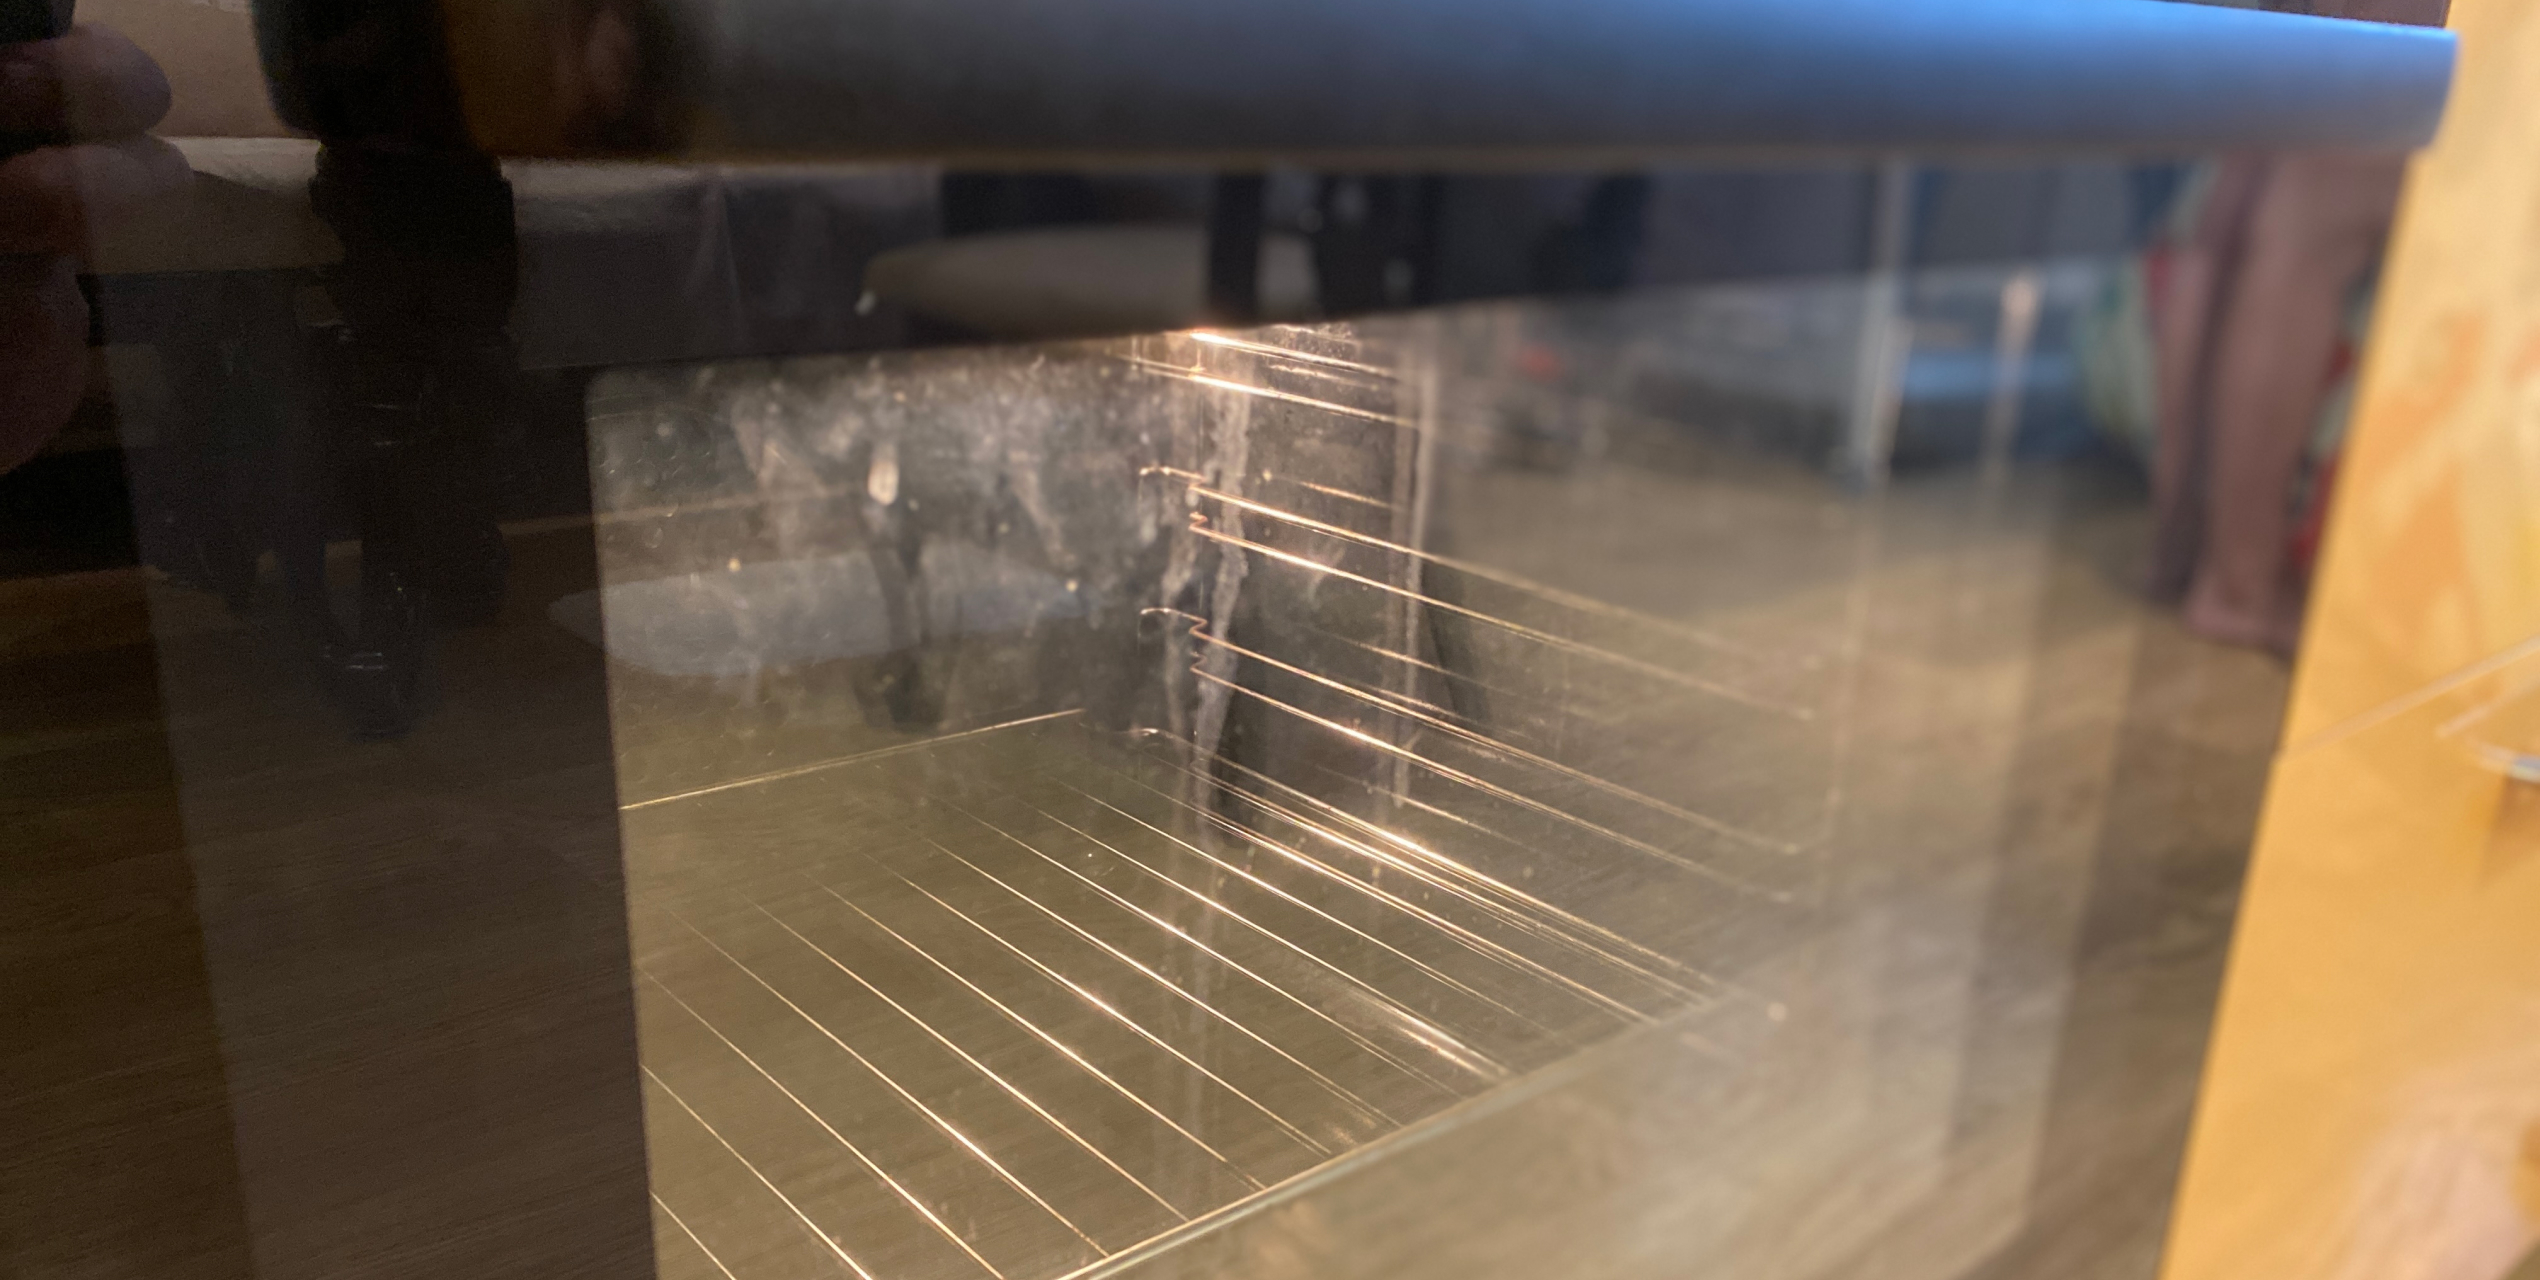 Cleaning between oven glass layers